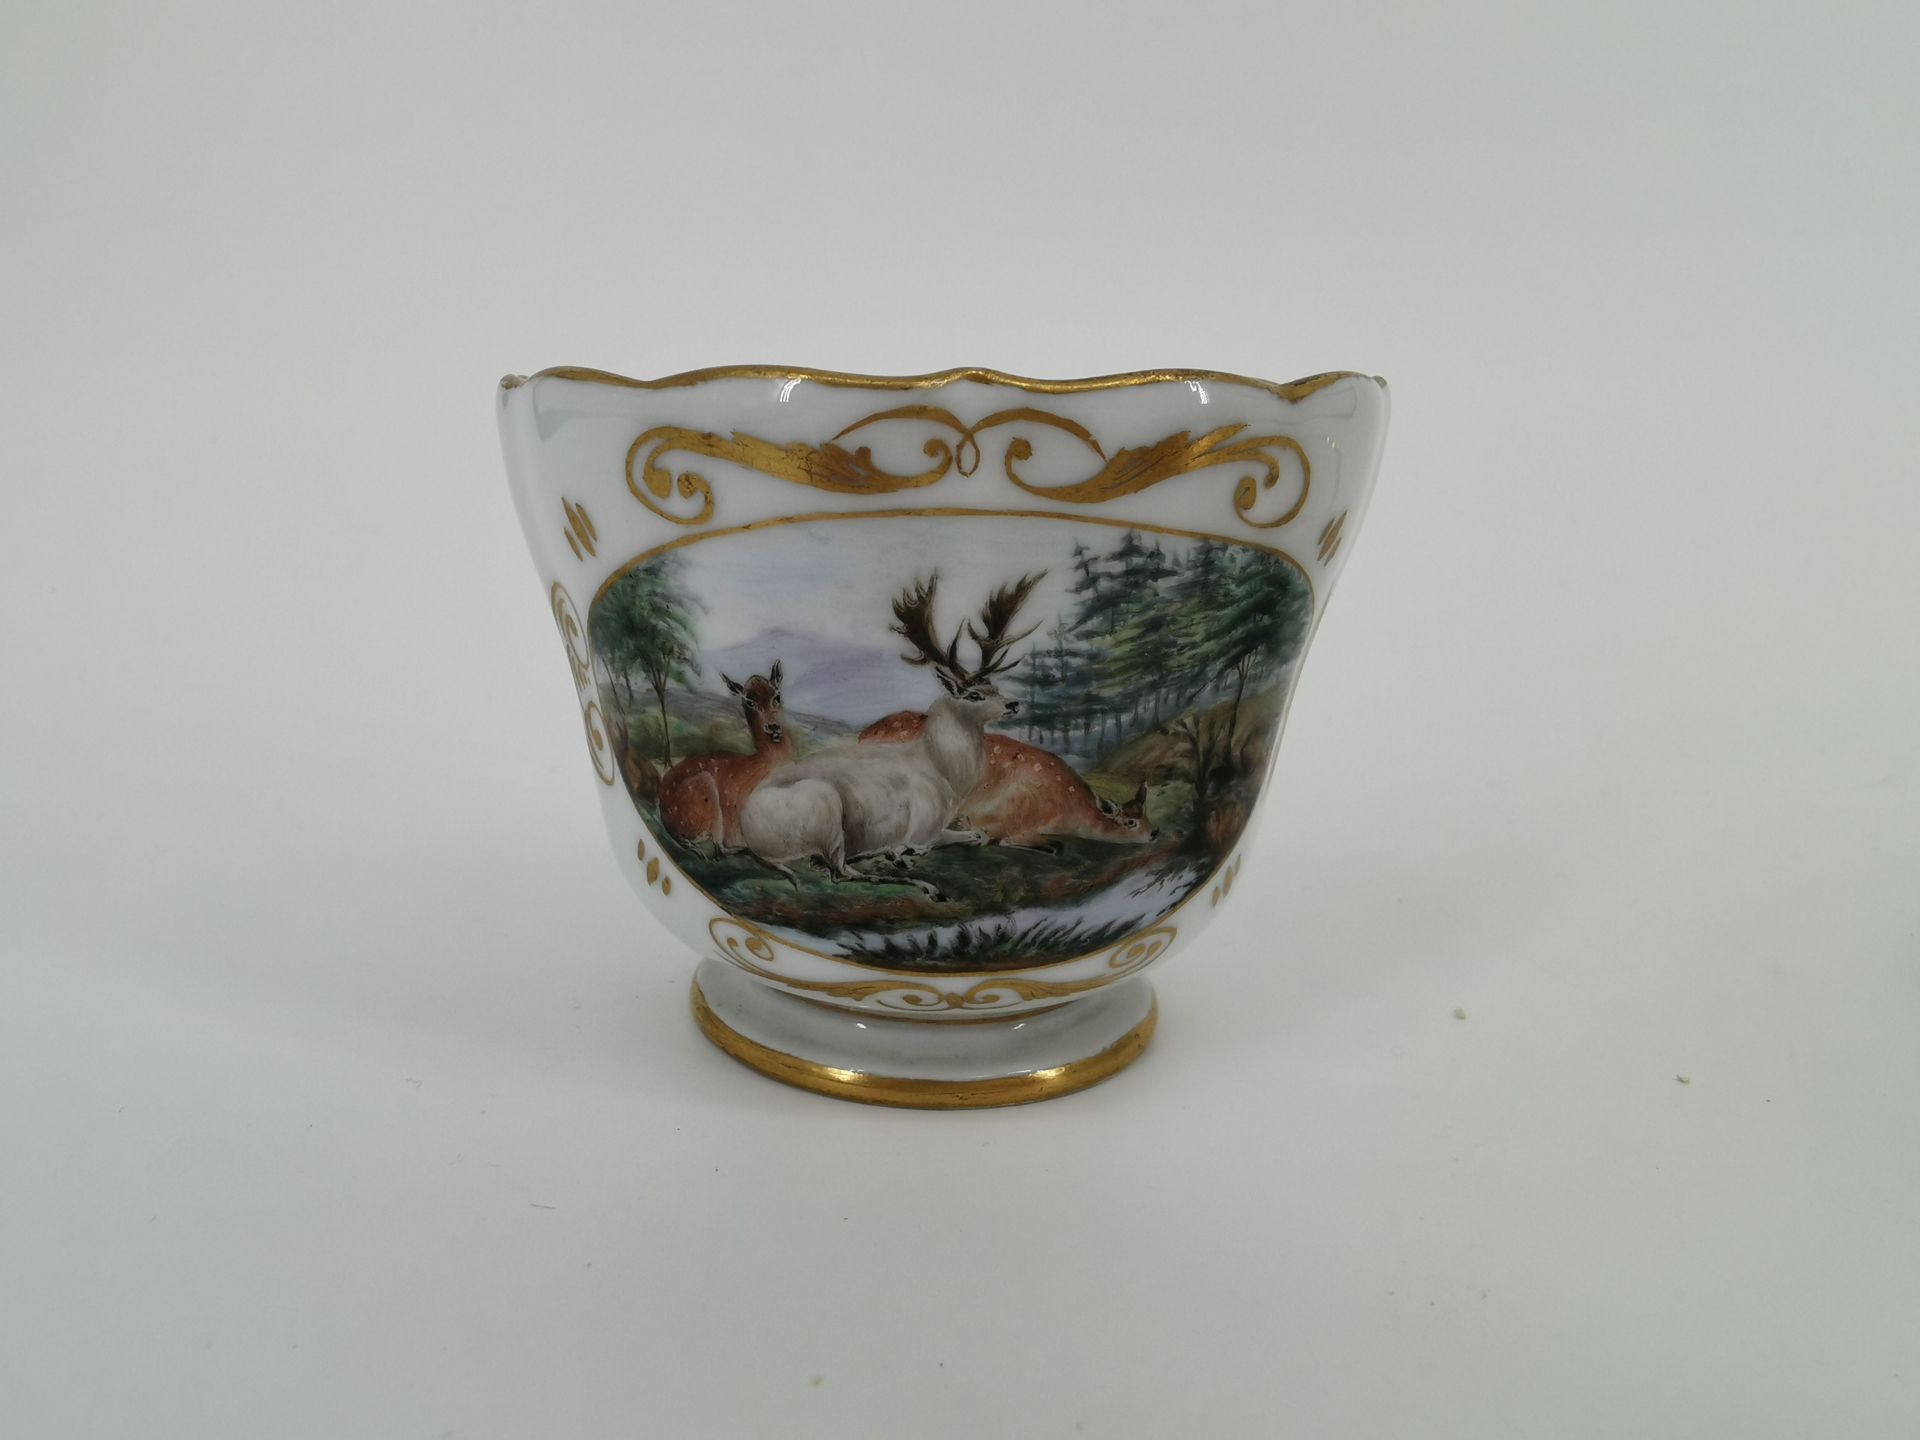 CUP WITH HUNTING SCENE - Image 4 of 5